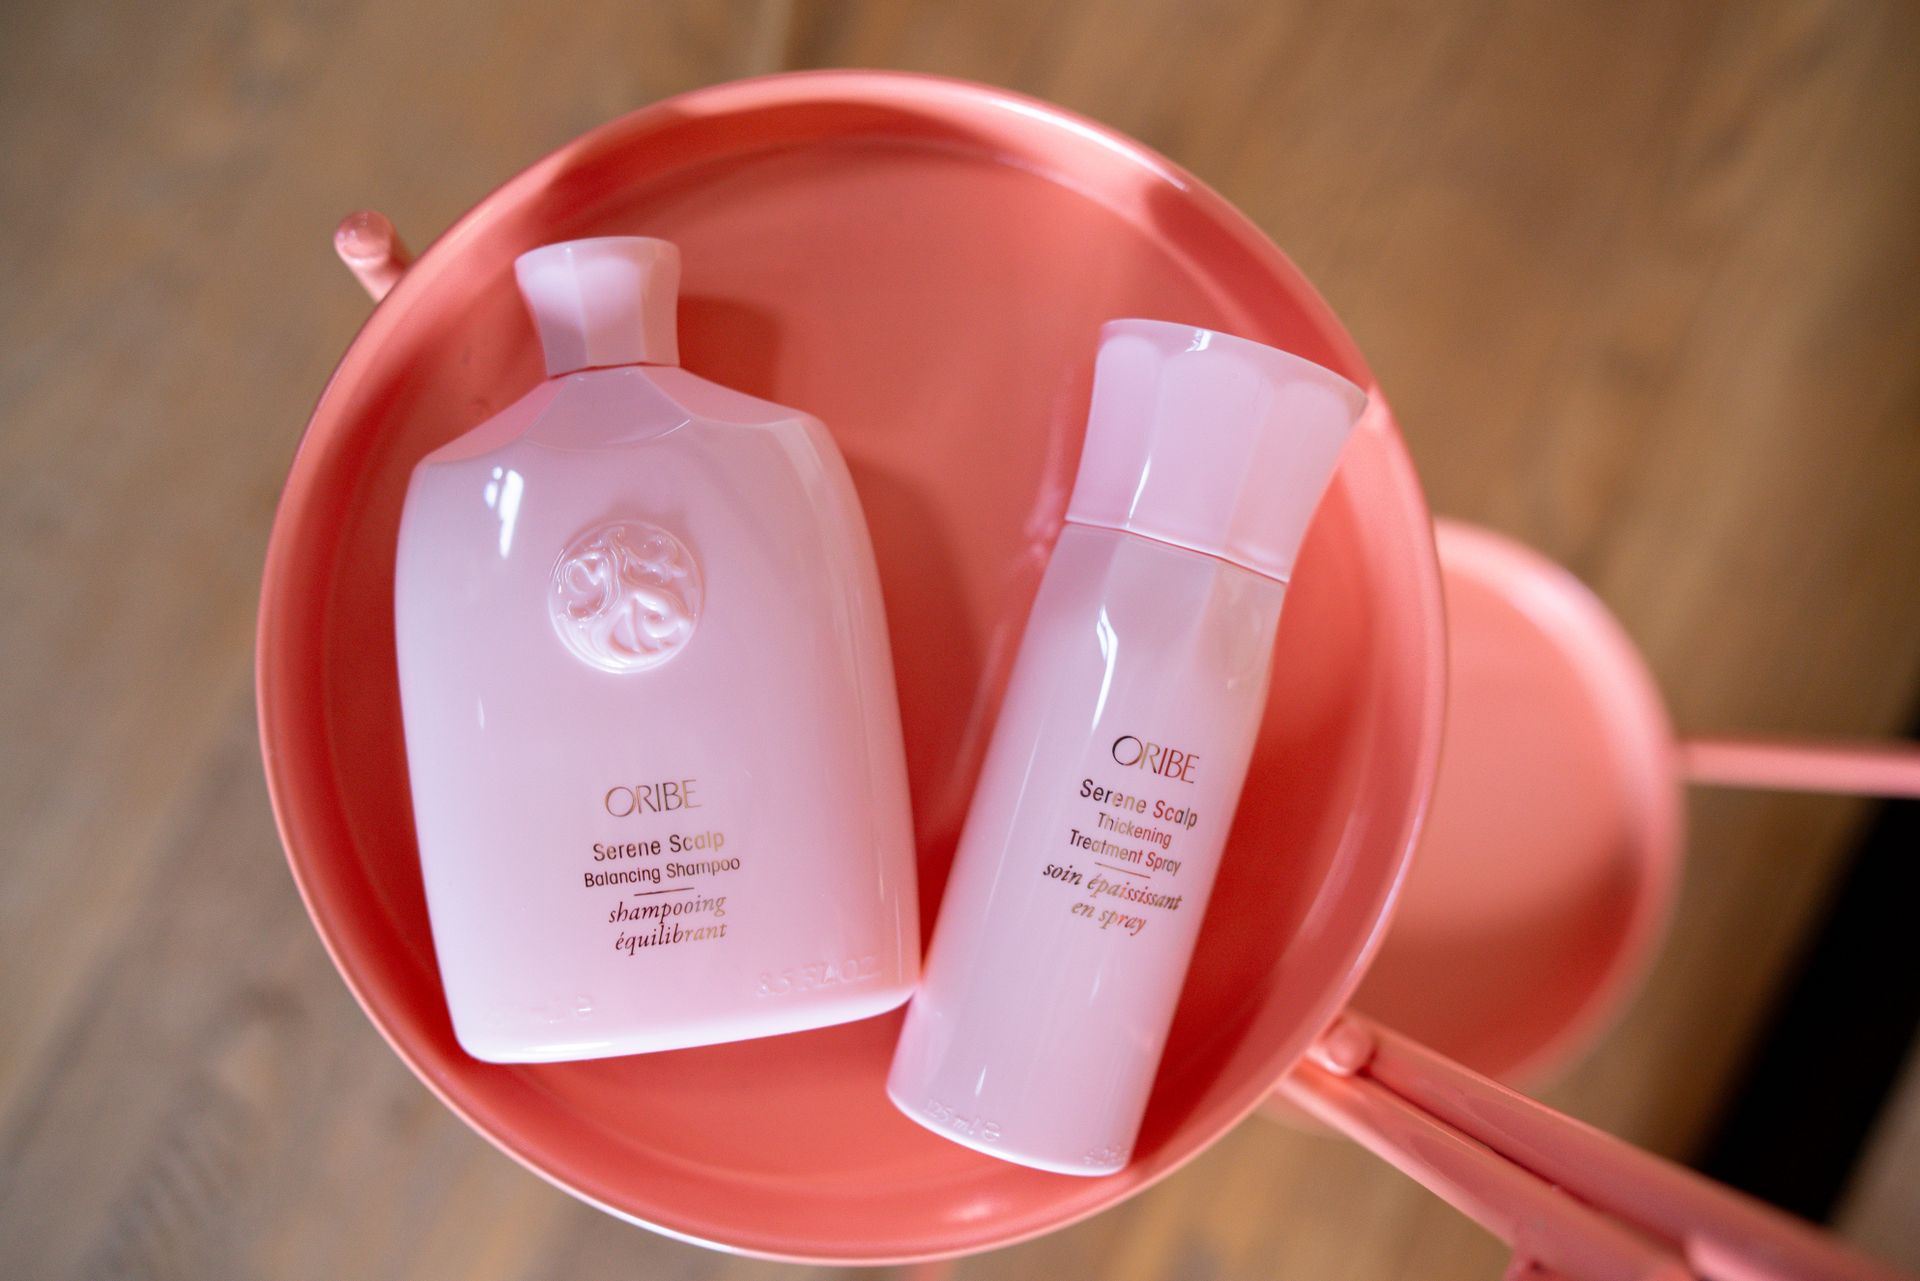 Pink Oribe Serene Balancing Shampoo and Thickening Treatment Spray bottles sitting in pink pot.